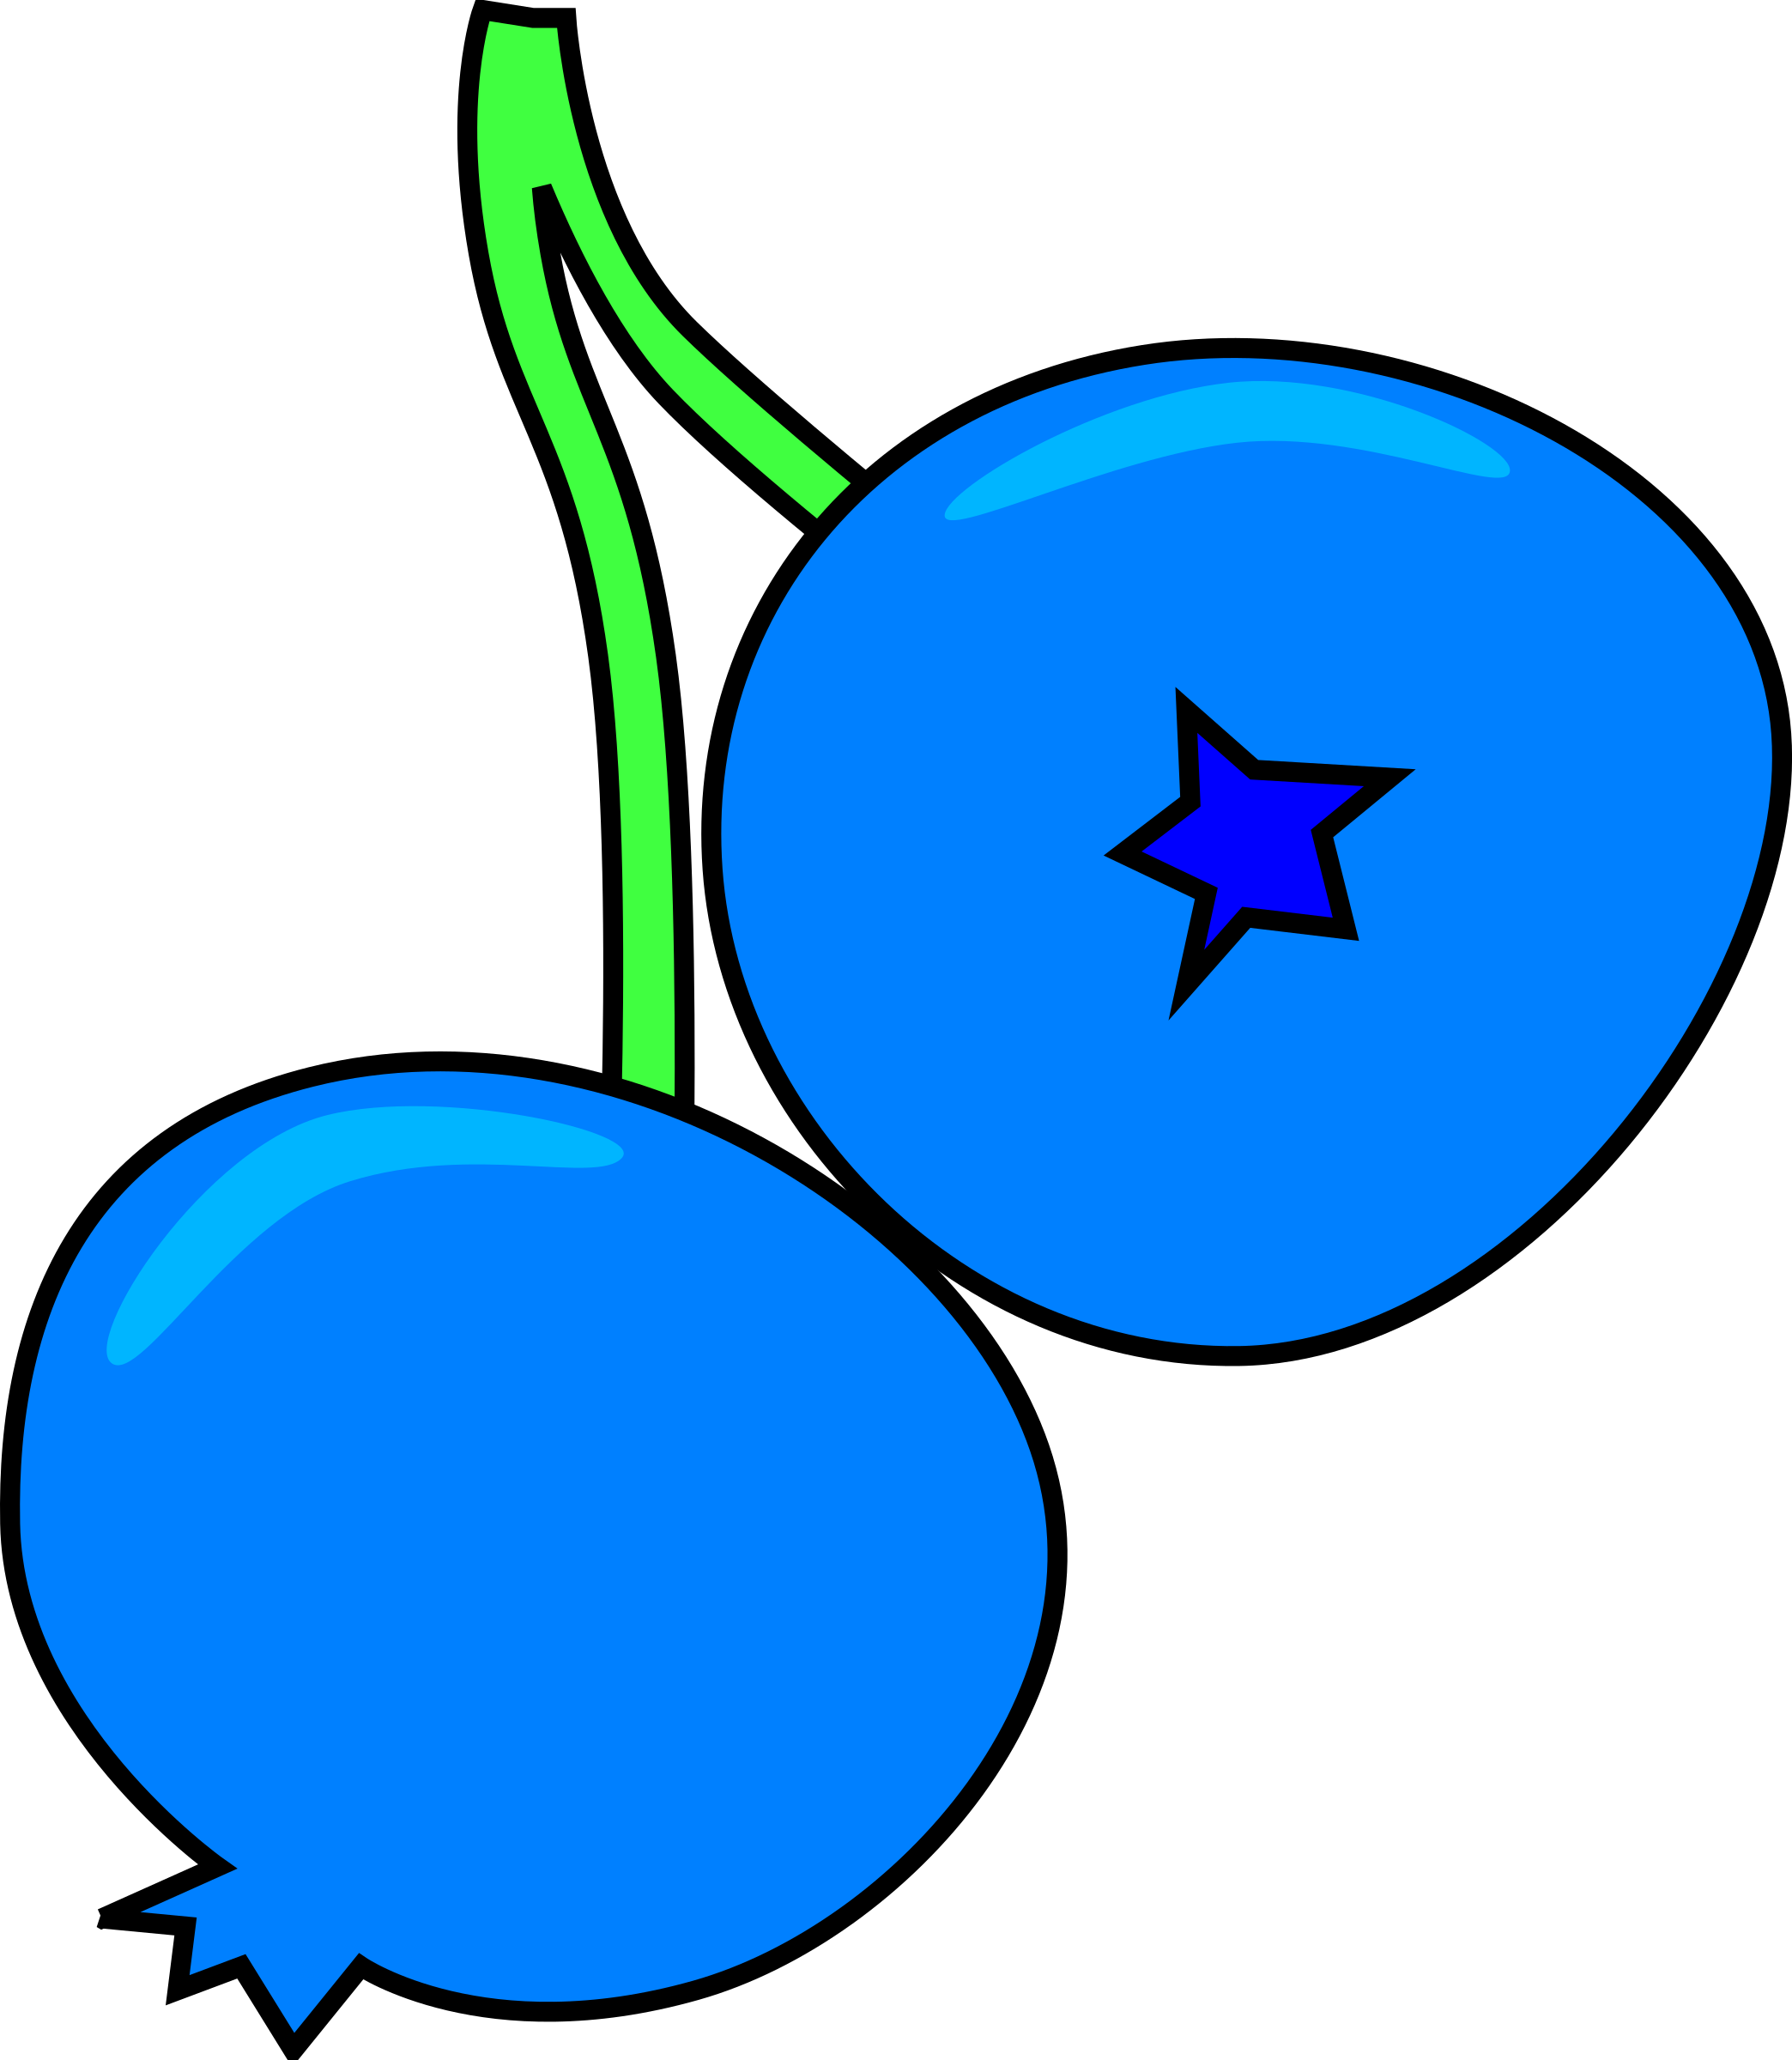 Free clipart fruit. Blueberry big image png